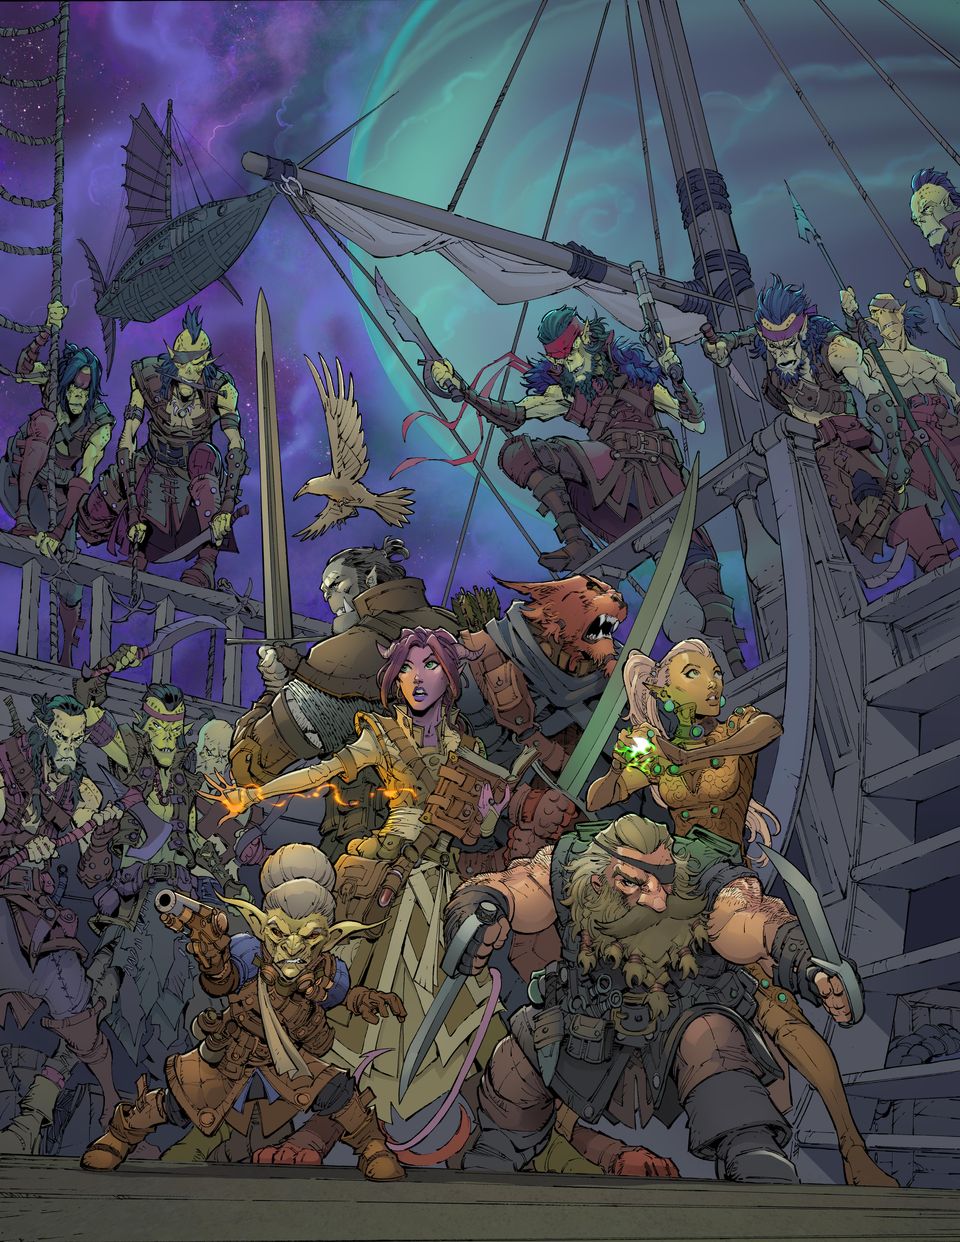 Cover art for Spelljammer Academy showing a party on the deck of a ship, being attacked by what look like Githyanki pirates